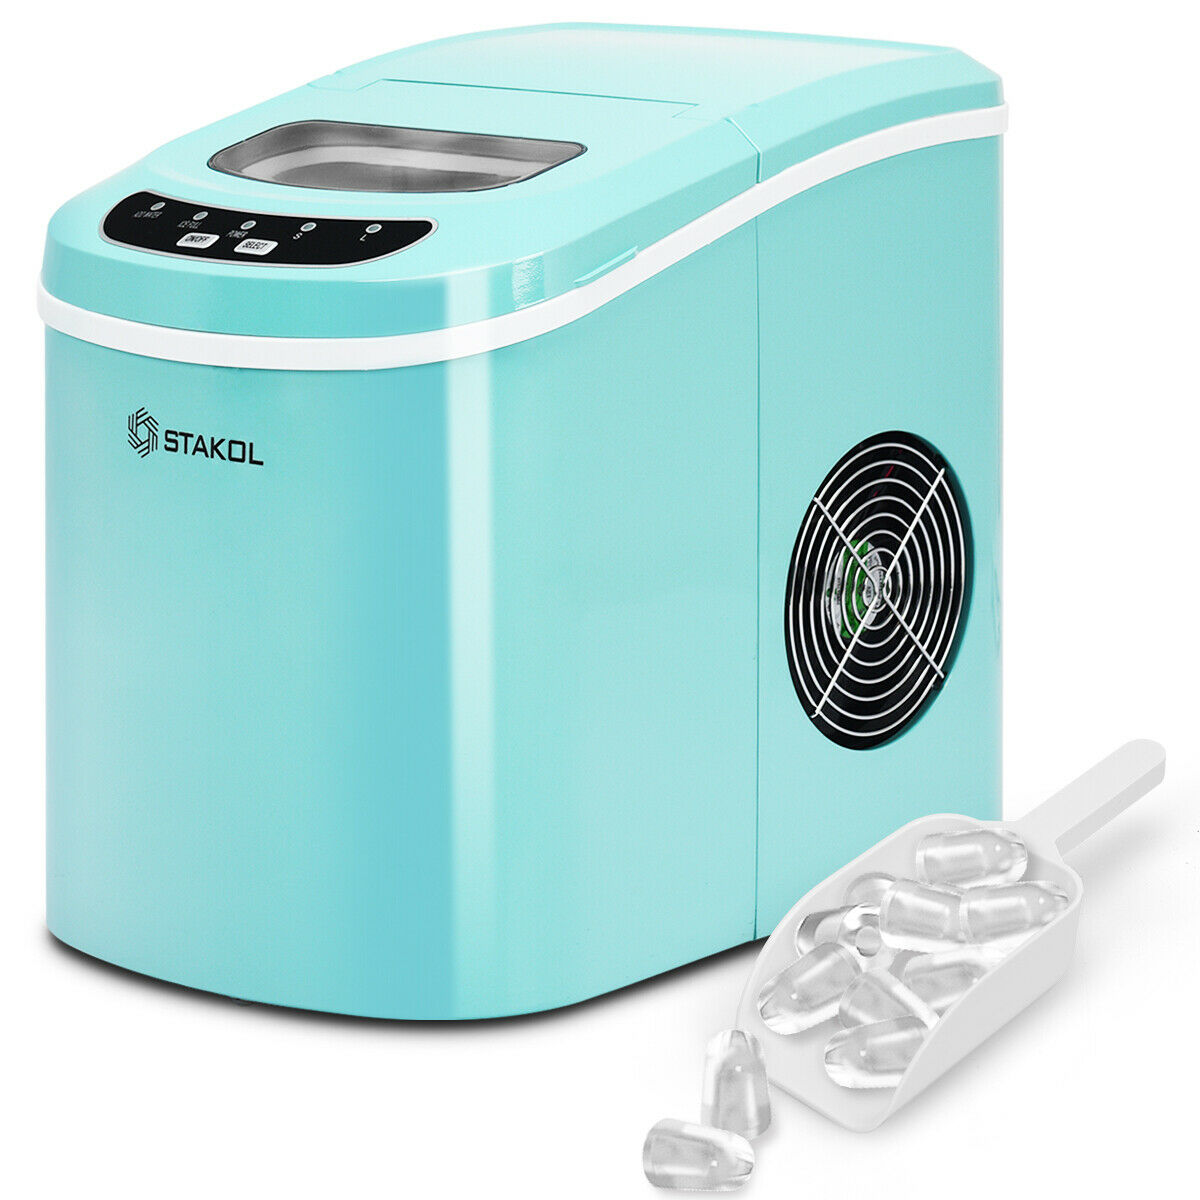 Stakol Portable Compact Electric Ice Maker Machine Mini Cube 26lb/Day Mint Green - image 1 of 10